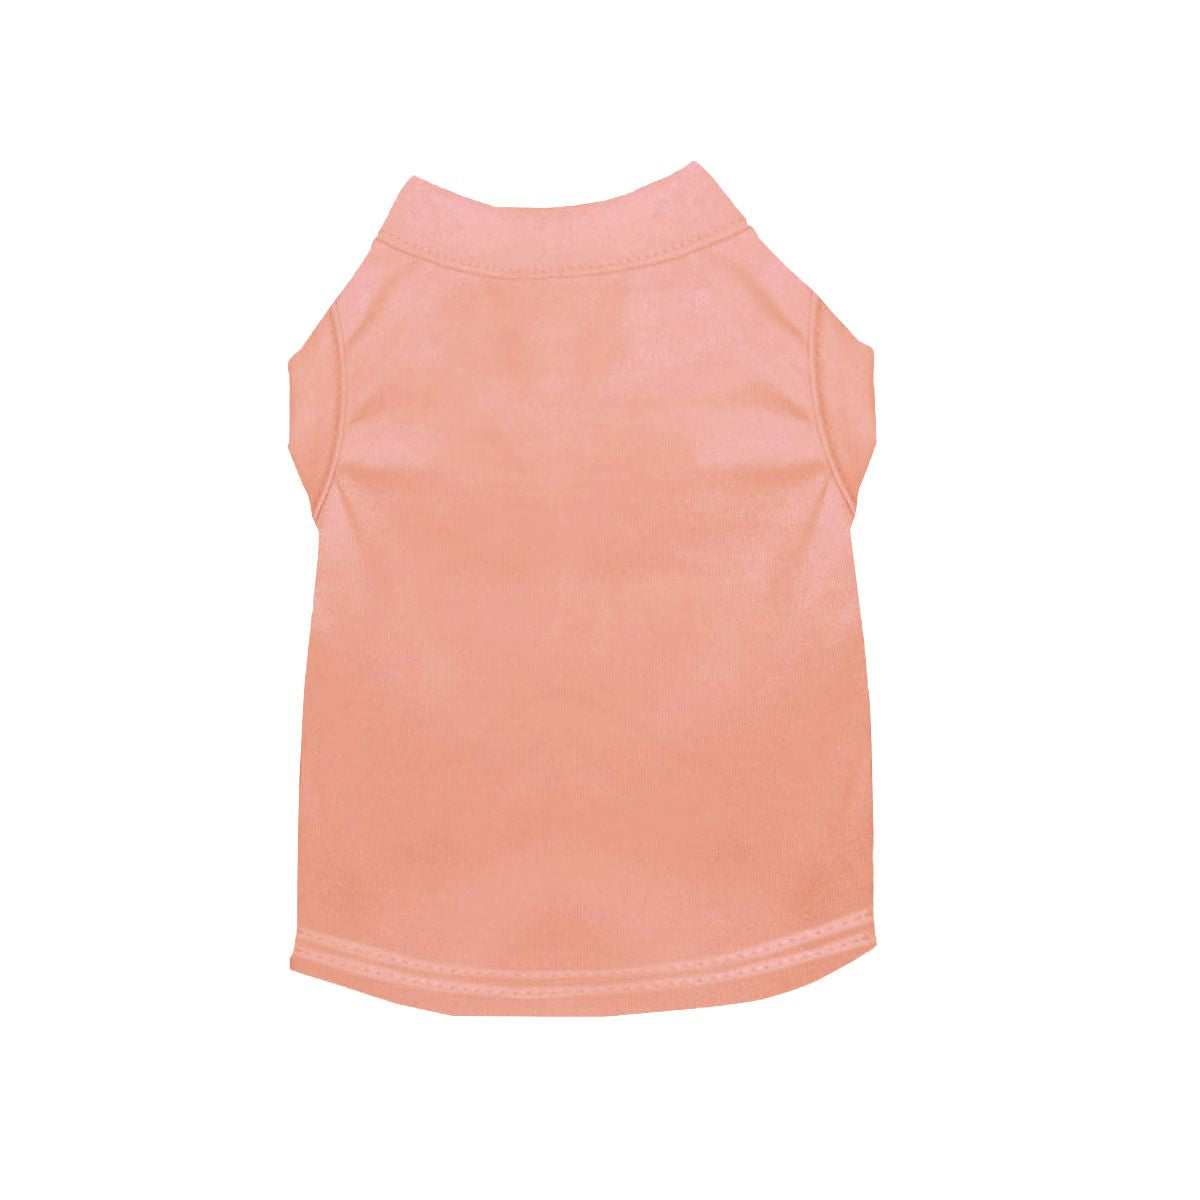 Cotton Poly Blend Tee Shirt in Peach | Pawlicious & Company